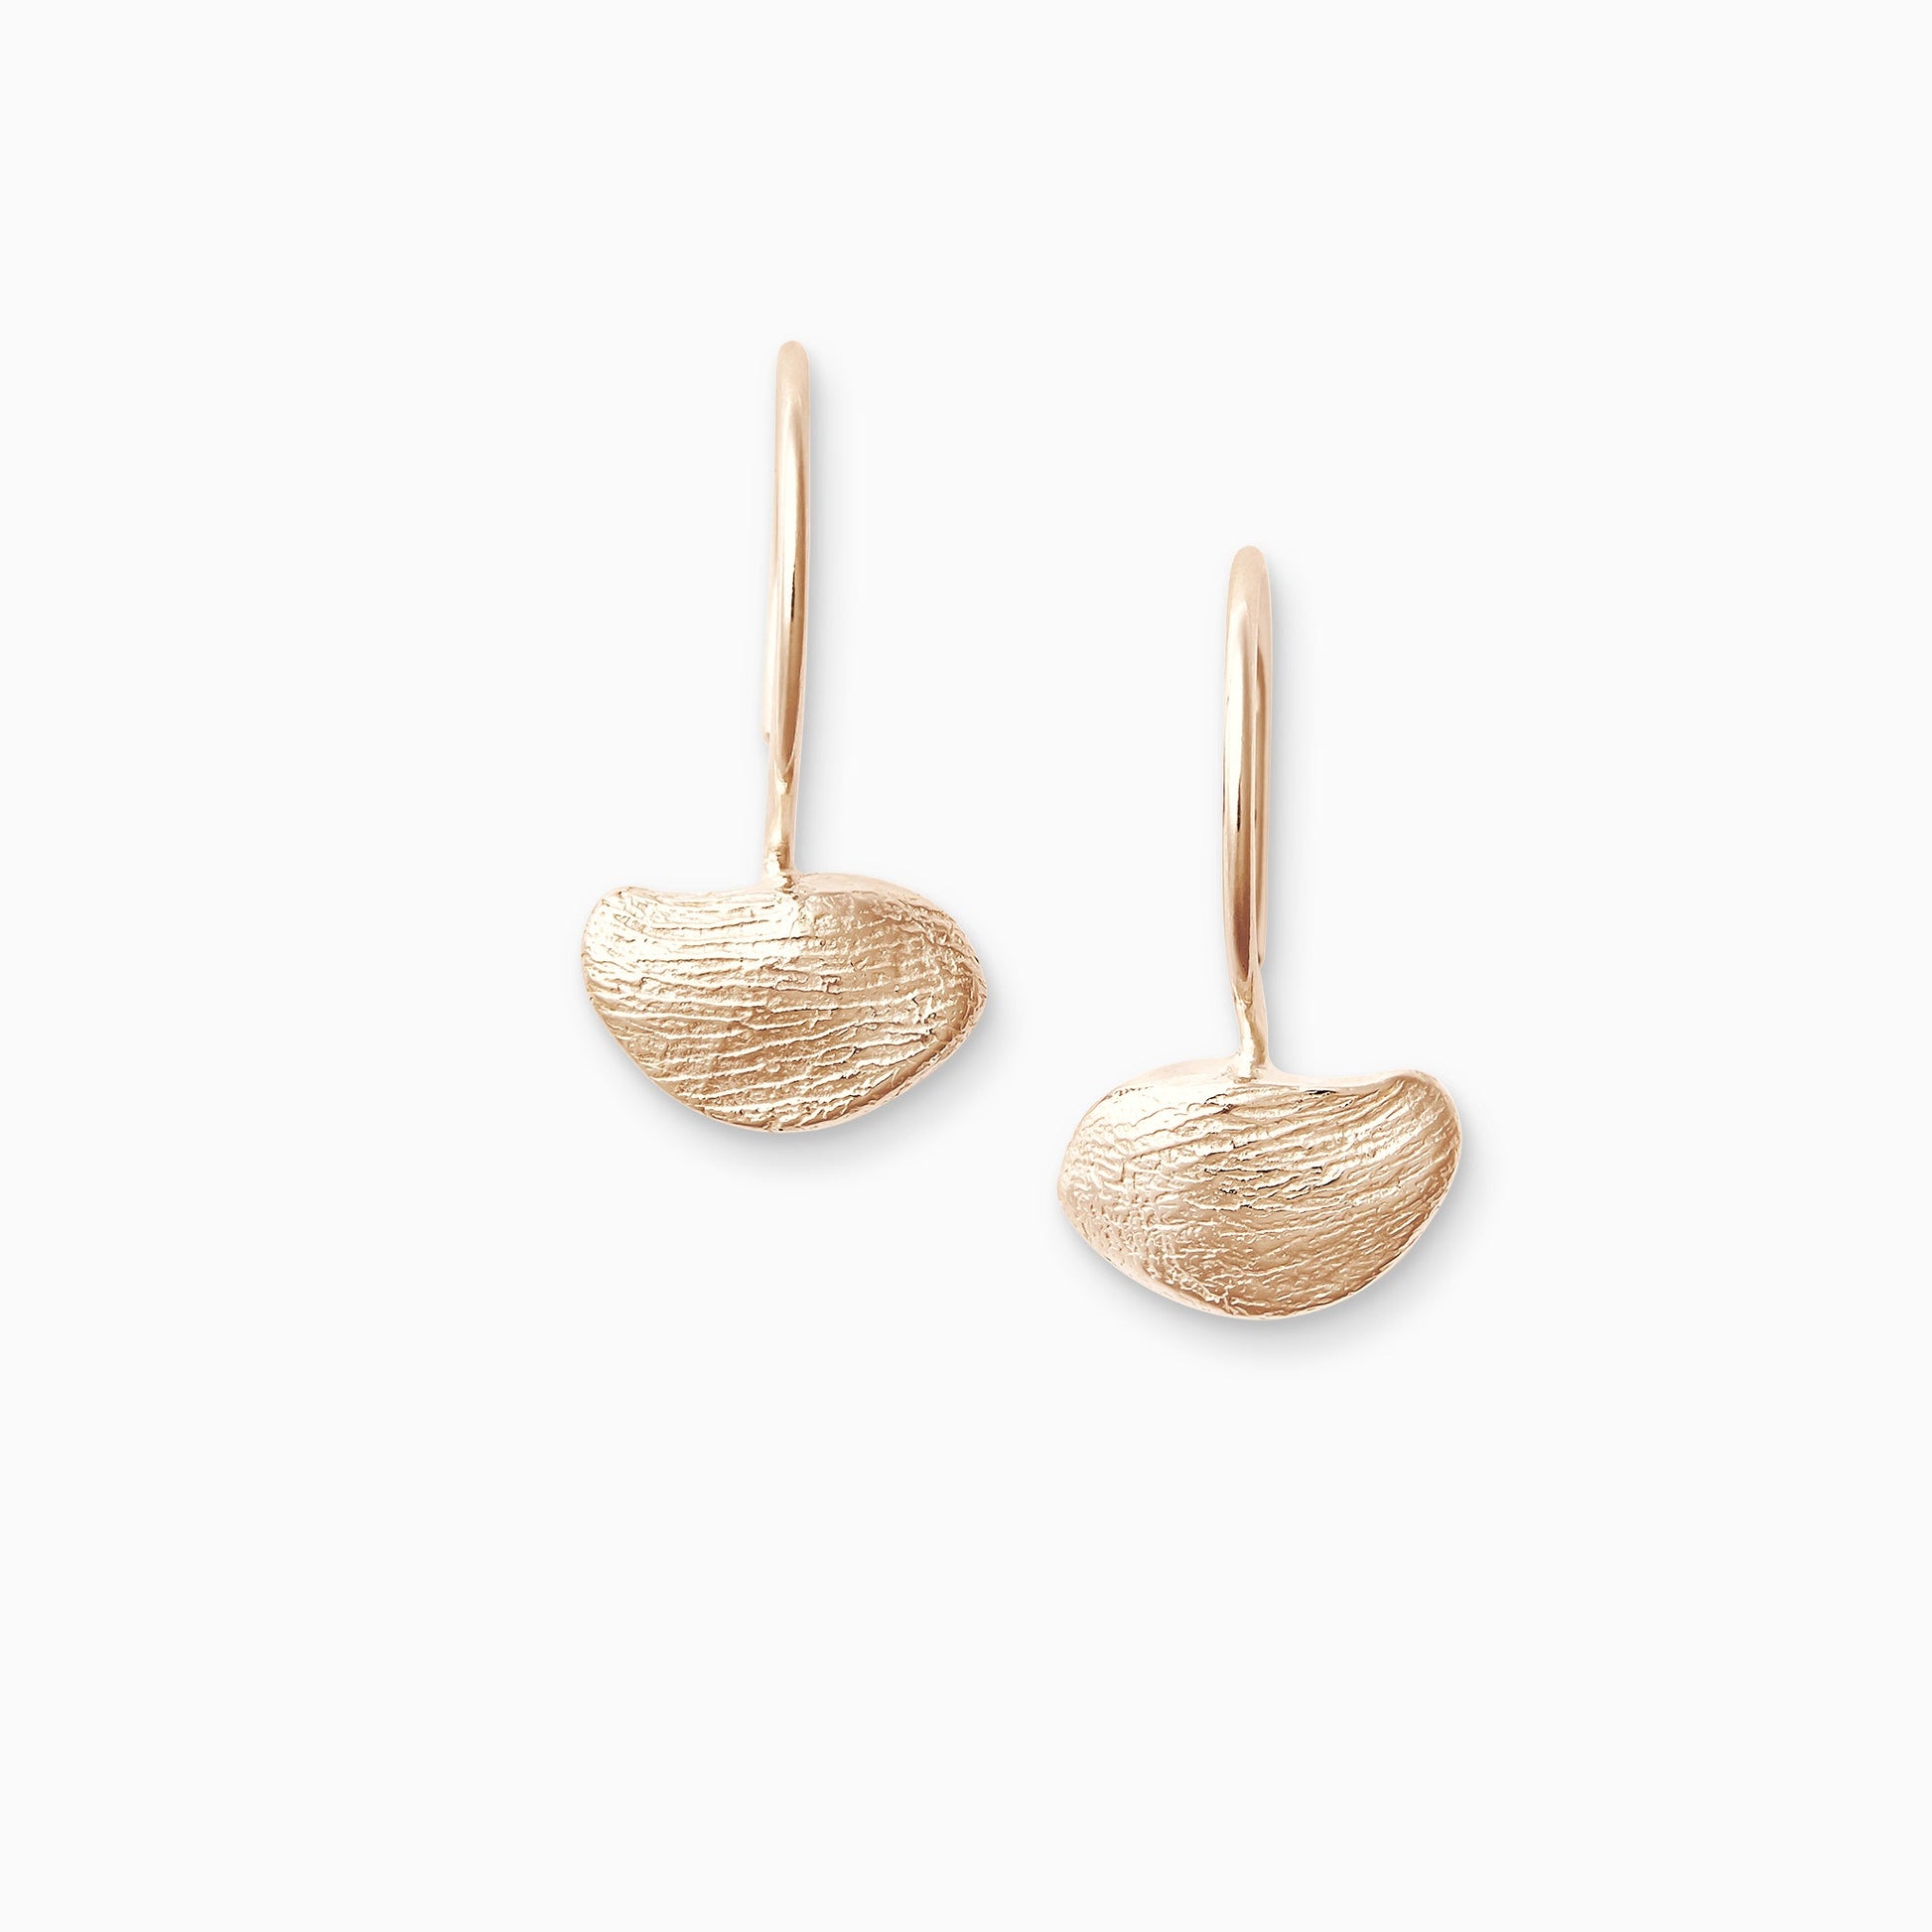 A pair of 18ct Fairtrade rose gold drop hoop earrings with a hoop fastening. Strong texture and irregular form. 22mm x 12mm plus round hoop ear wire